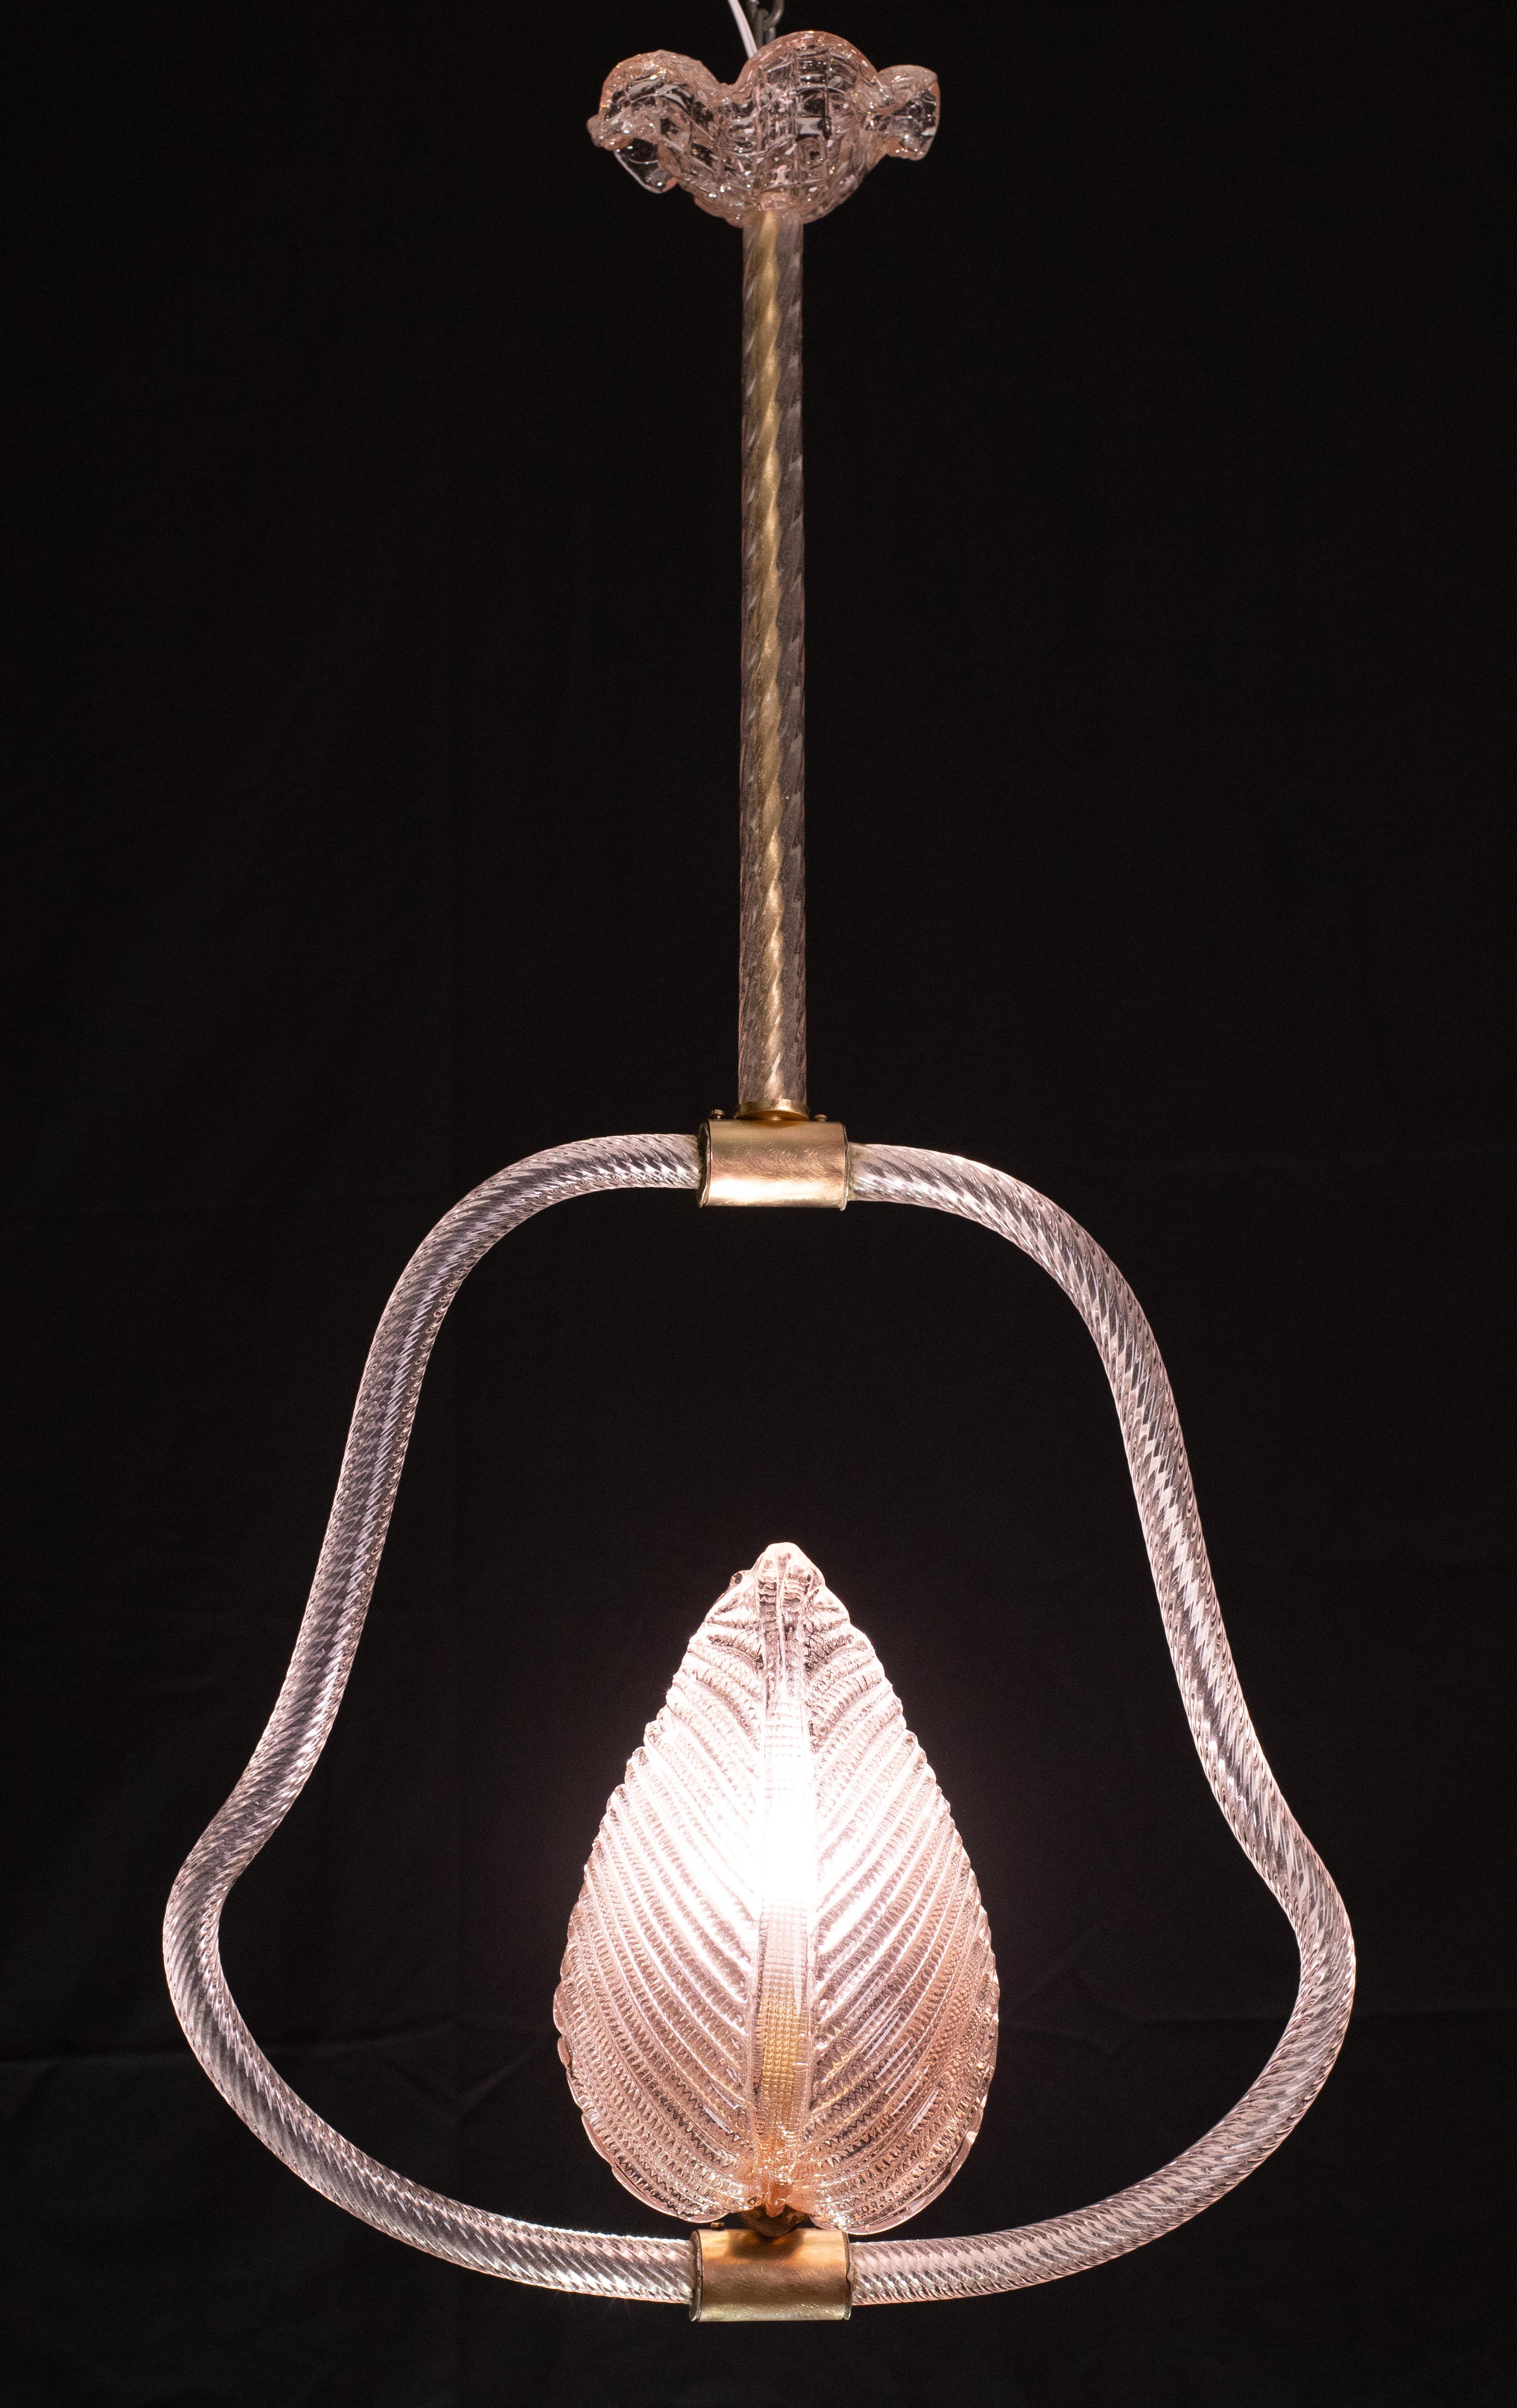 Stunning Murano chandelier by artist Ercole Barovier with rare pink glass.
The pendant consists of 6 glass elements and a brass structure.
It mounts a European standard e27 lamp.
It measures 90 centimetres in height and 47 centimetres in width,